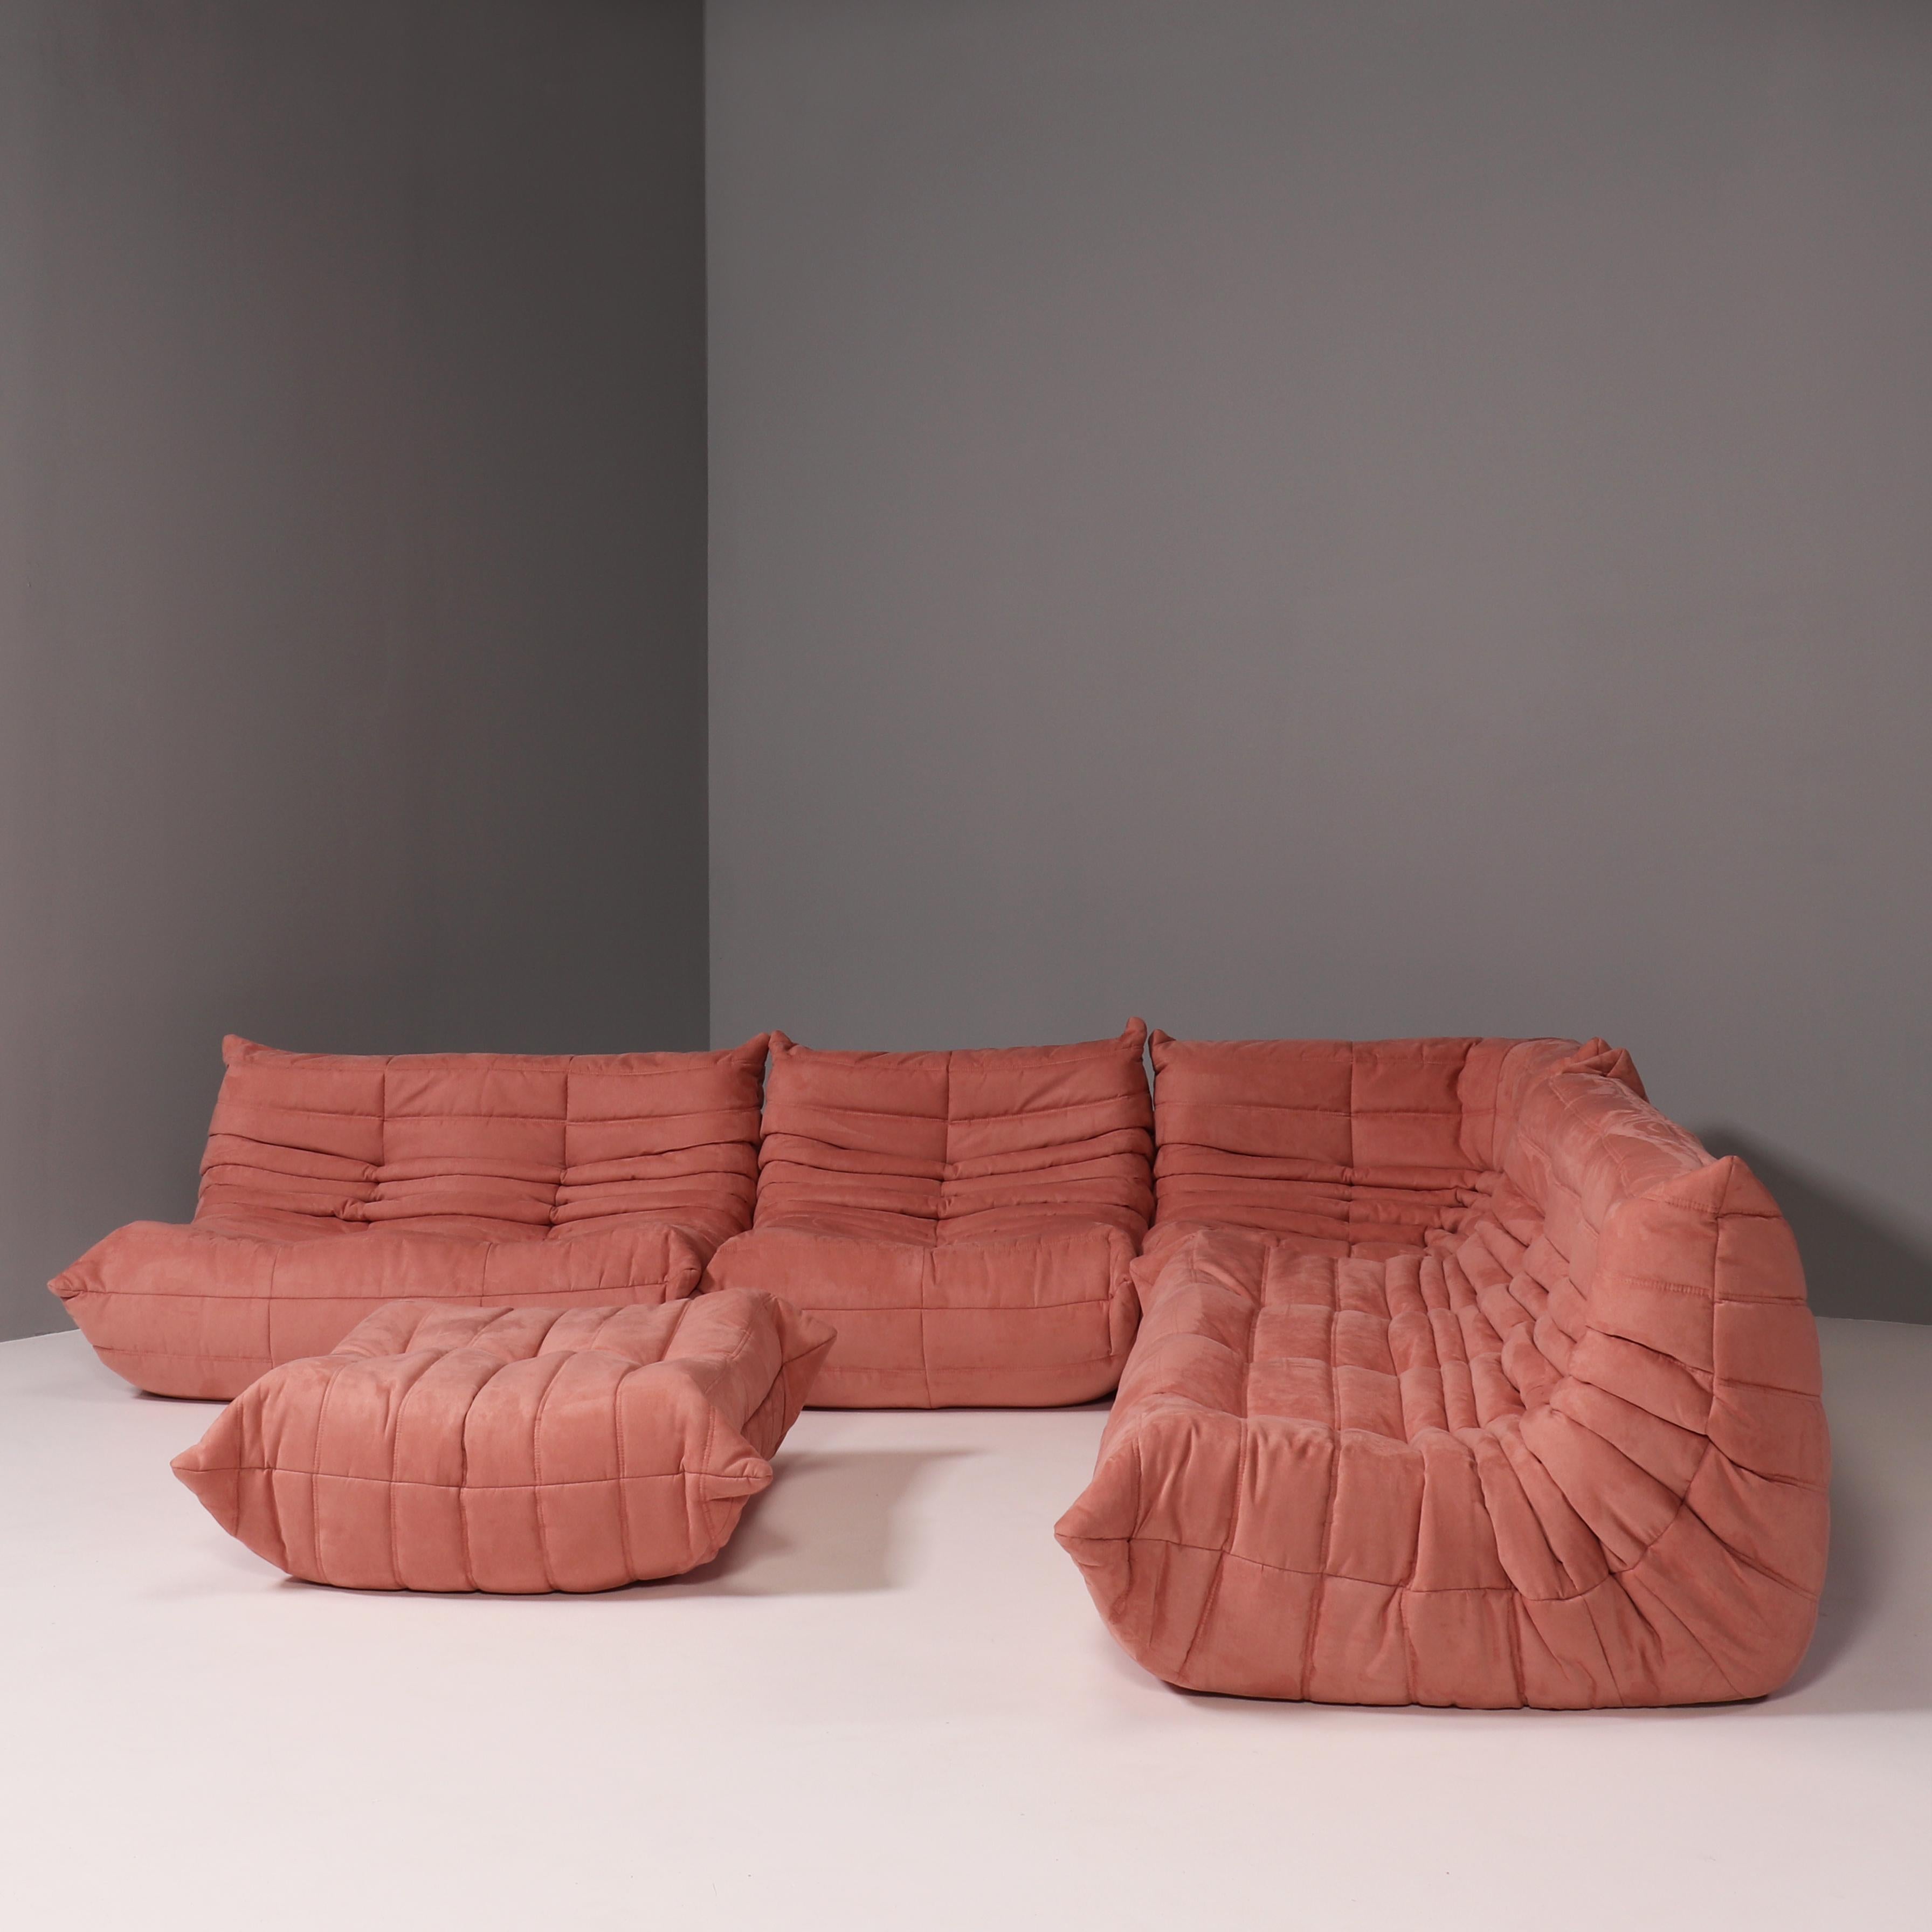 French Ligne Roset by Michel Ducaroy Togo Pink Modular Sofa and Footstool, Set of 5